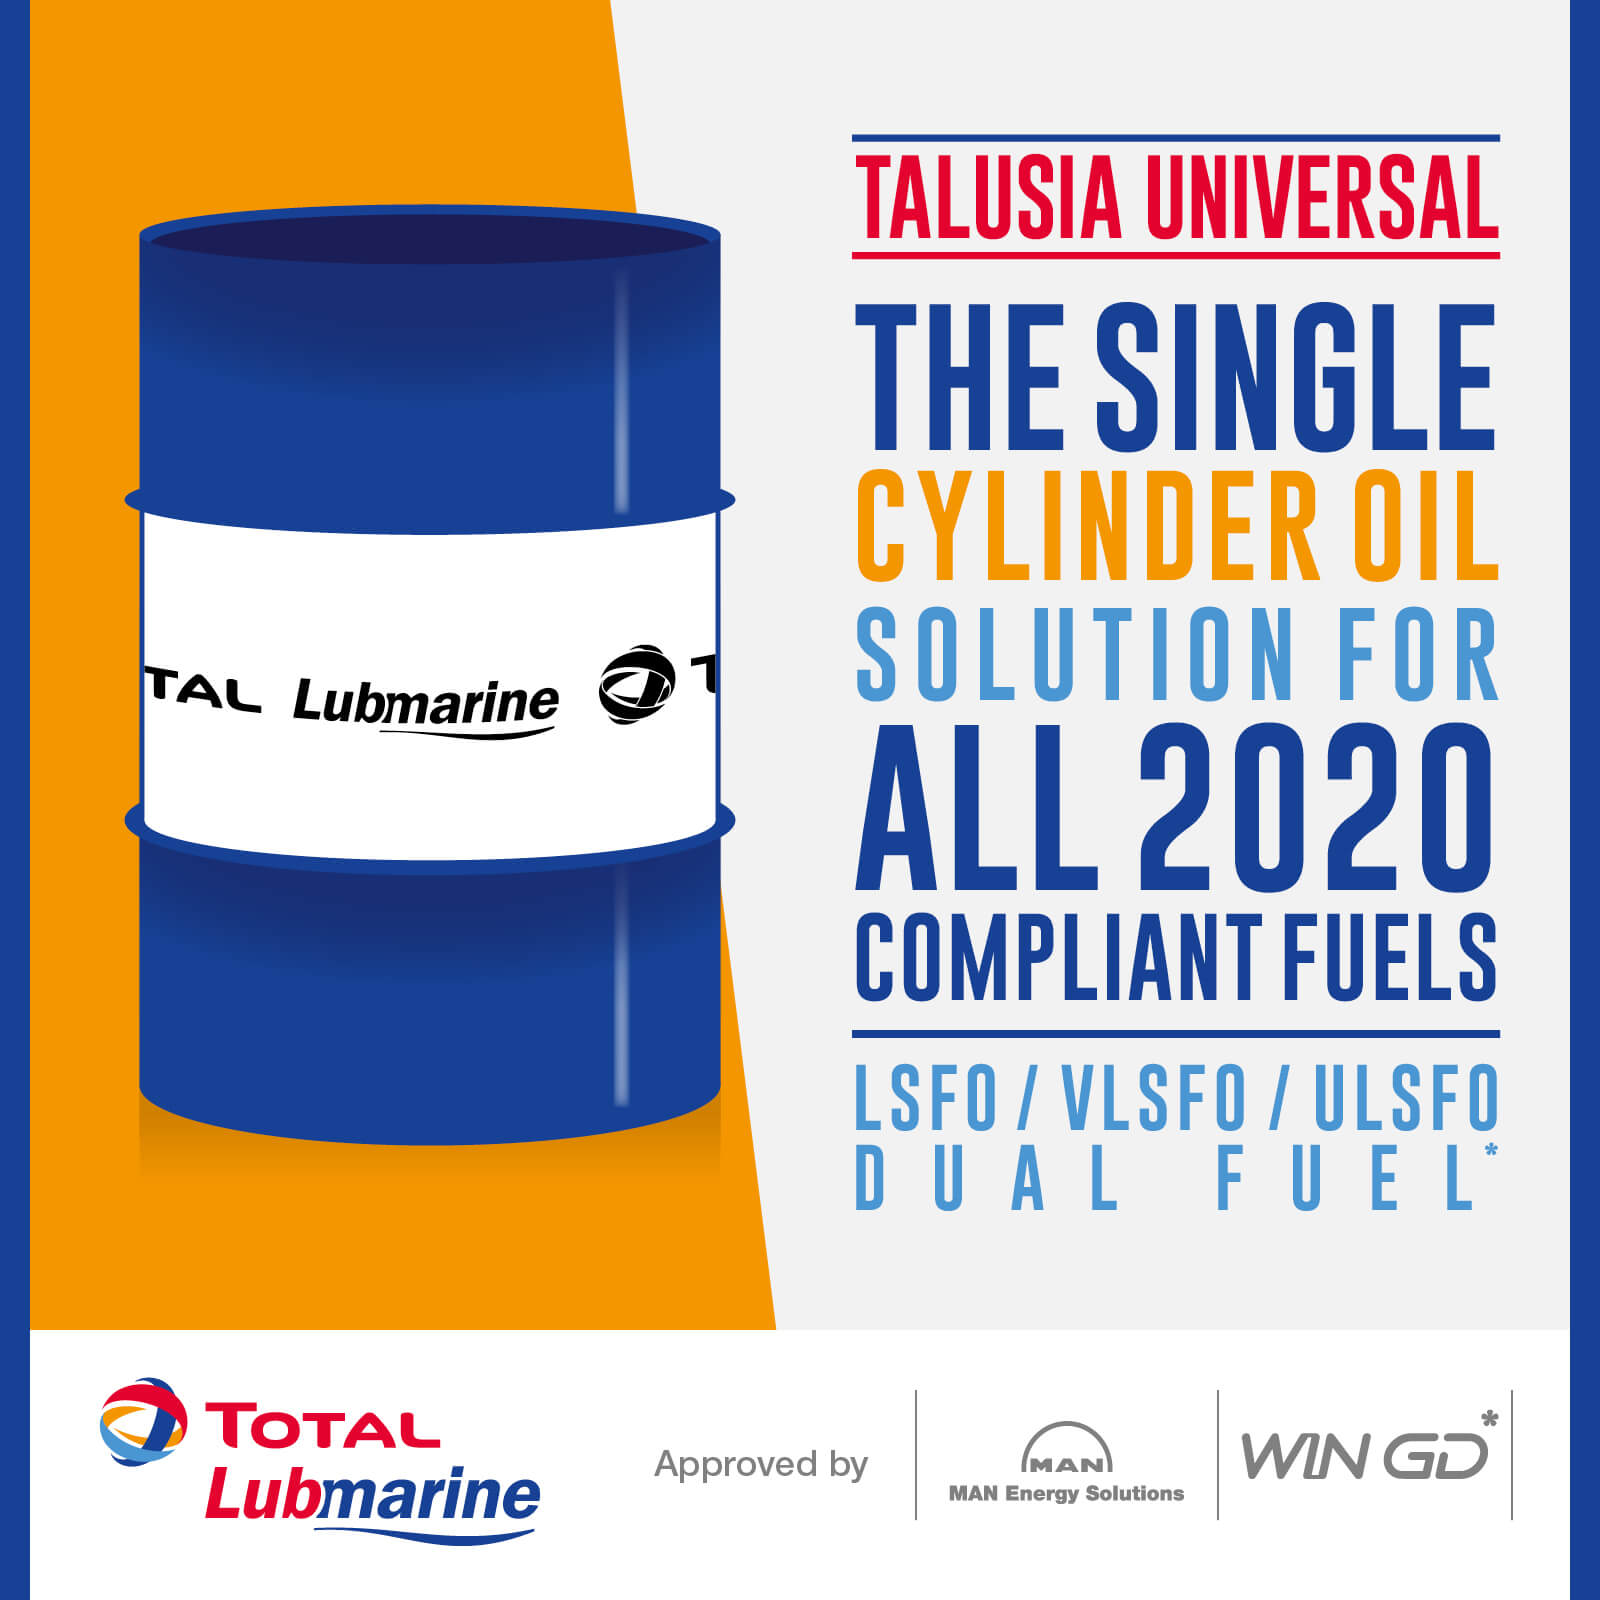 TALUSIA UNIVERSAL The Single Cylinder Oil Solution for all 2020 compliant fuels